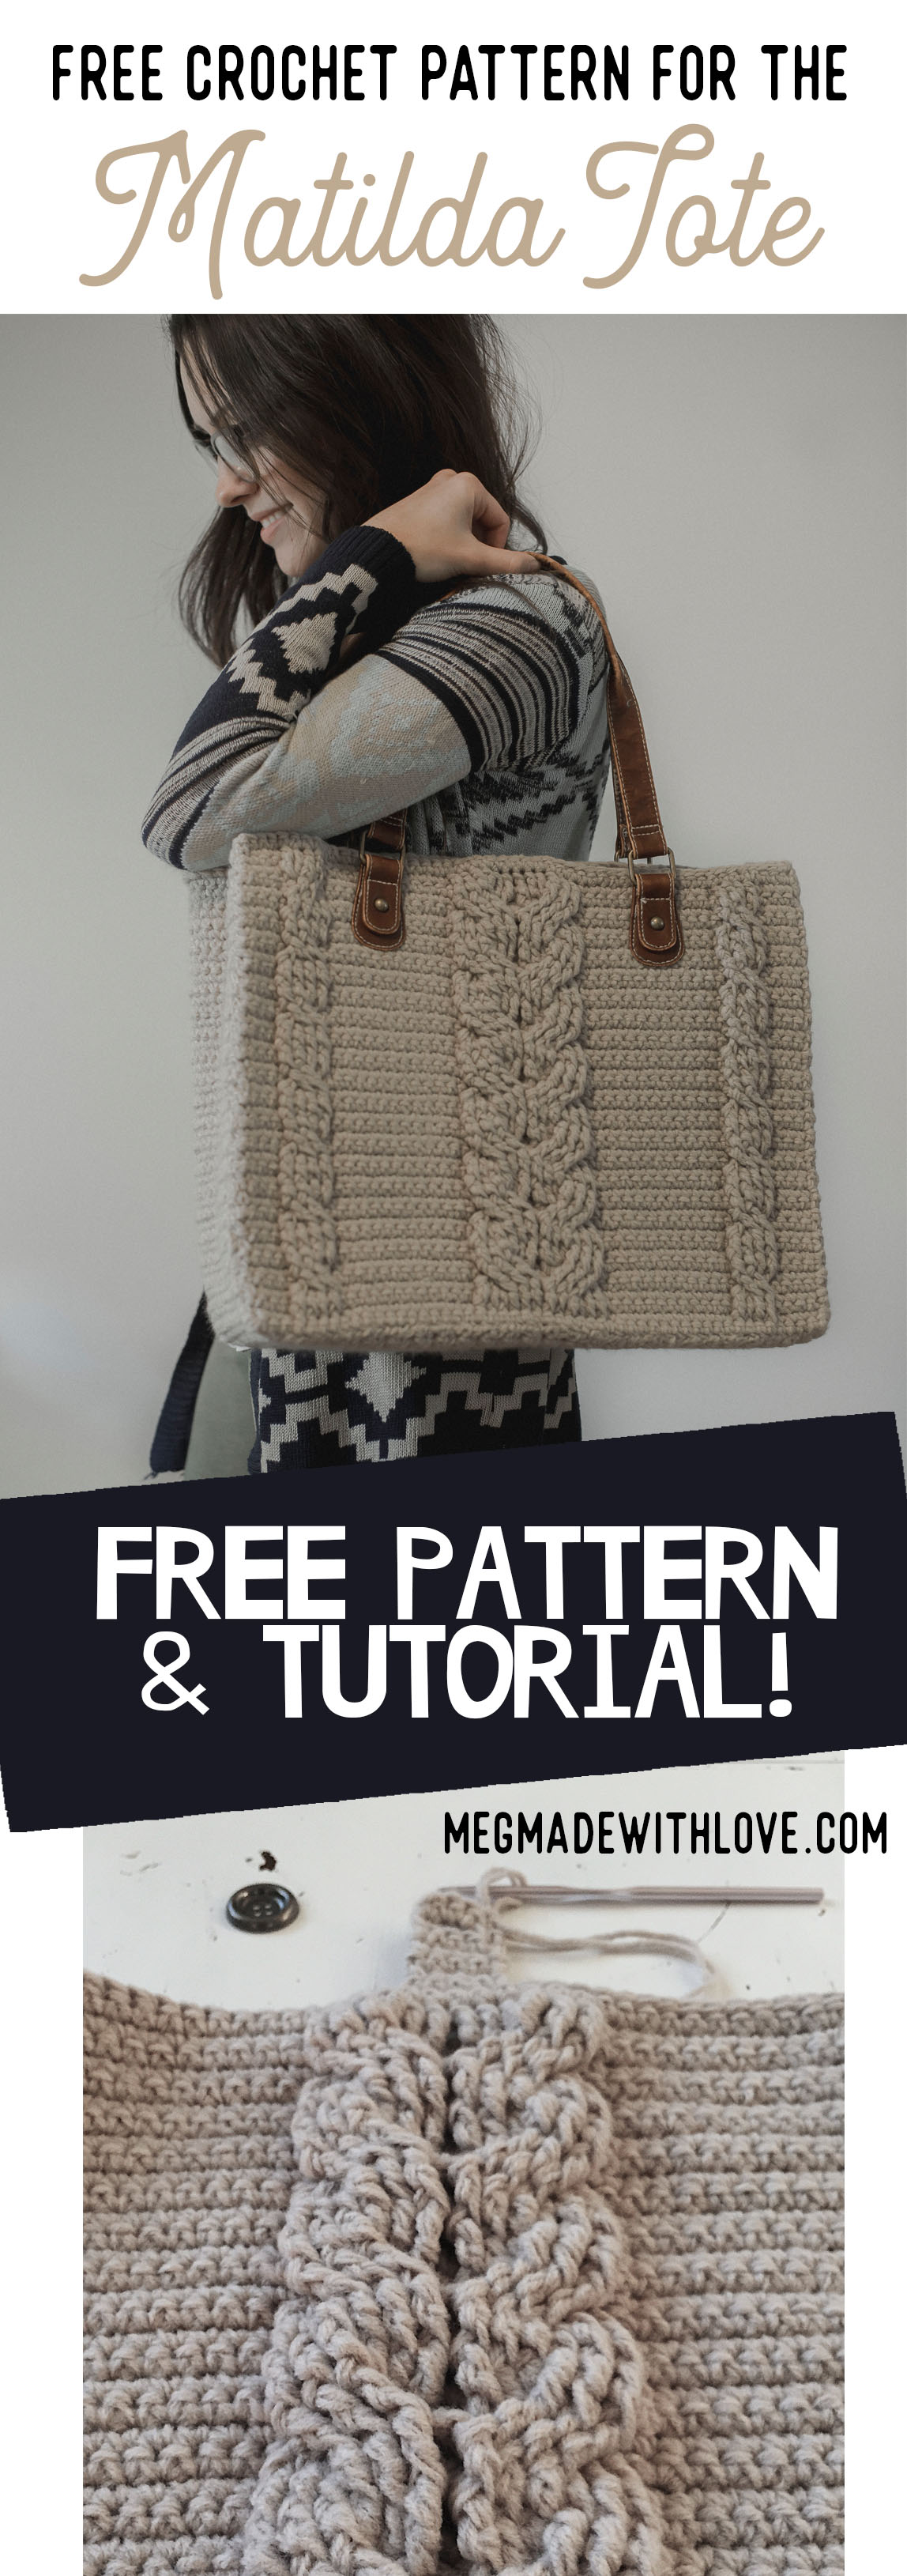 Crochet a Handbag with These Free Patterns